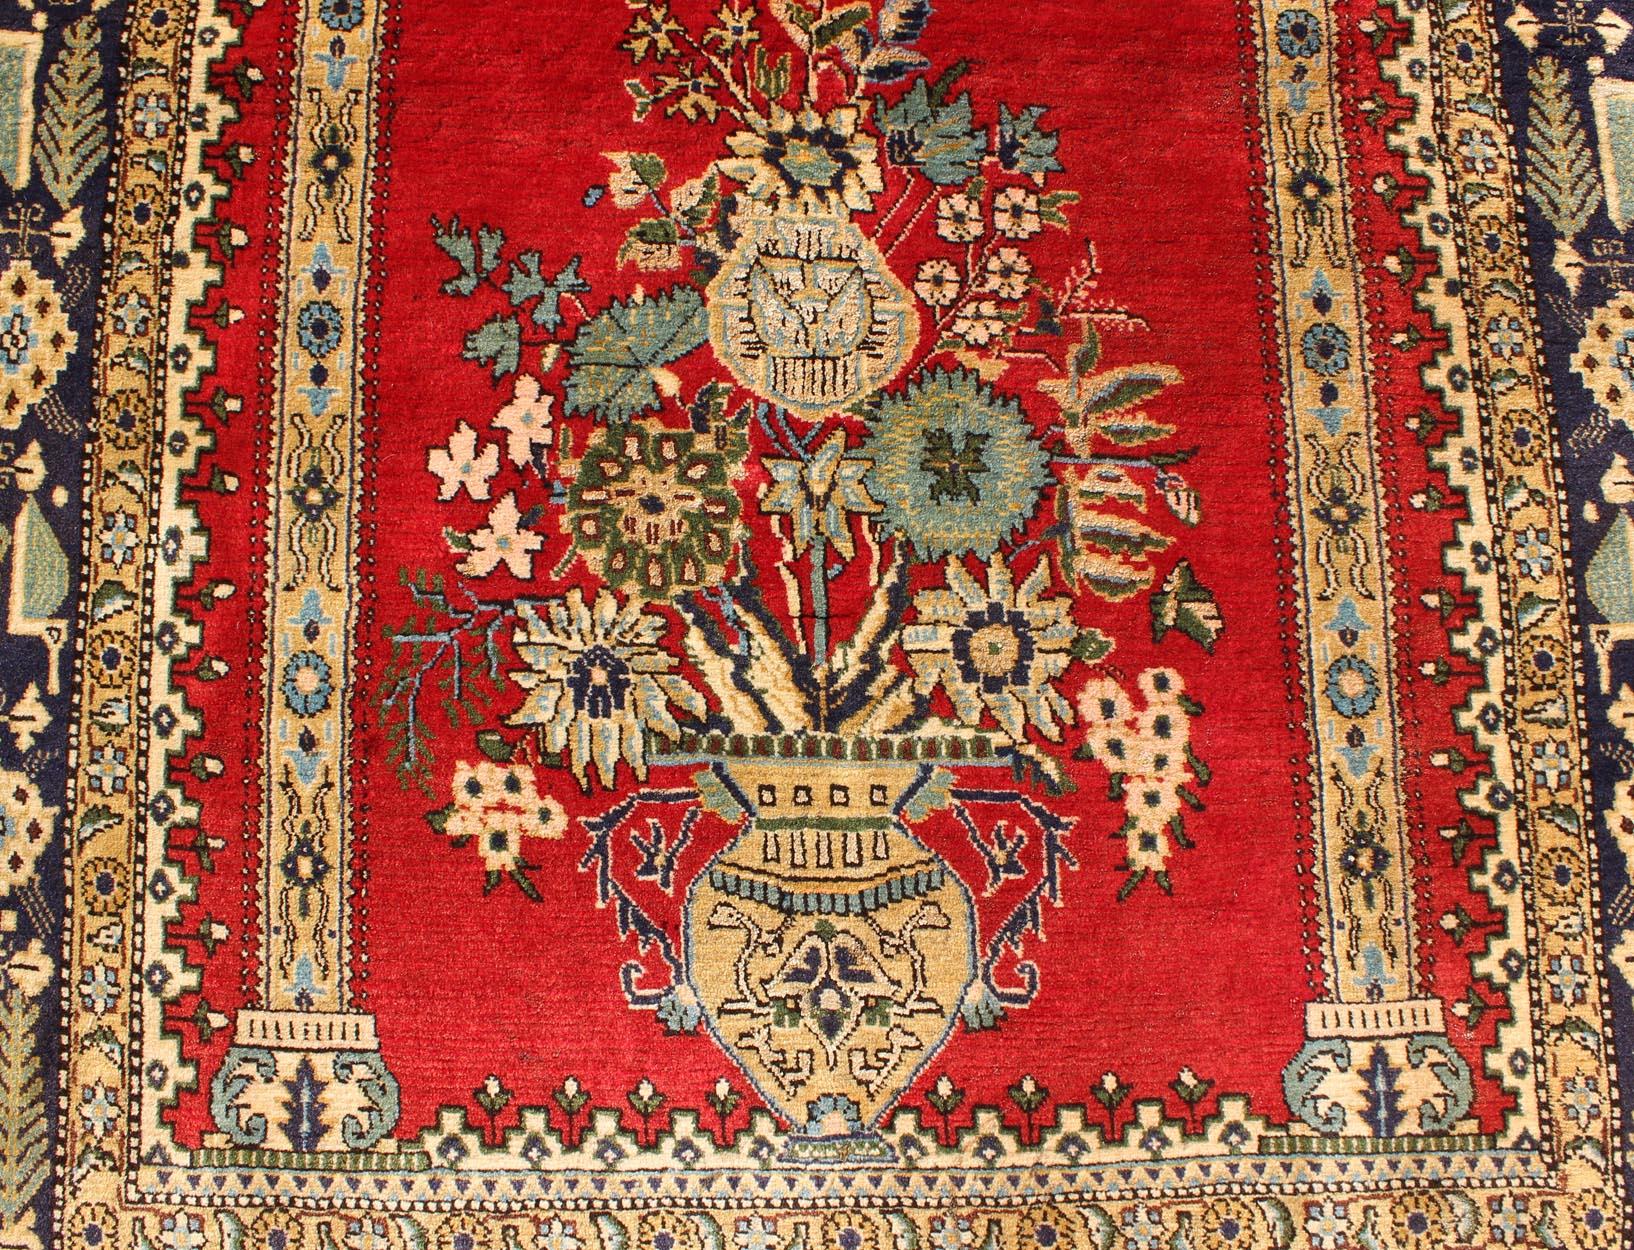 Tribal Vintage Persian Qum Prayer Rug in Bright Red with Floral Bouquet Chandelier